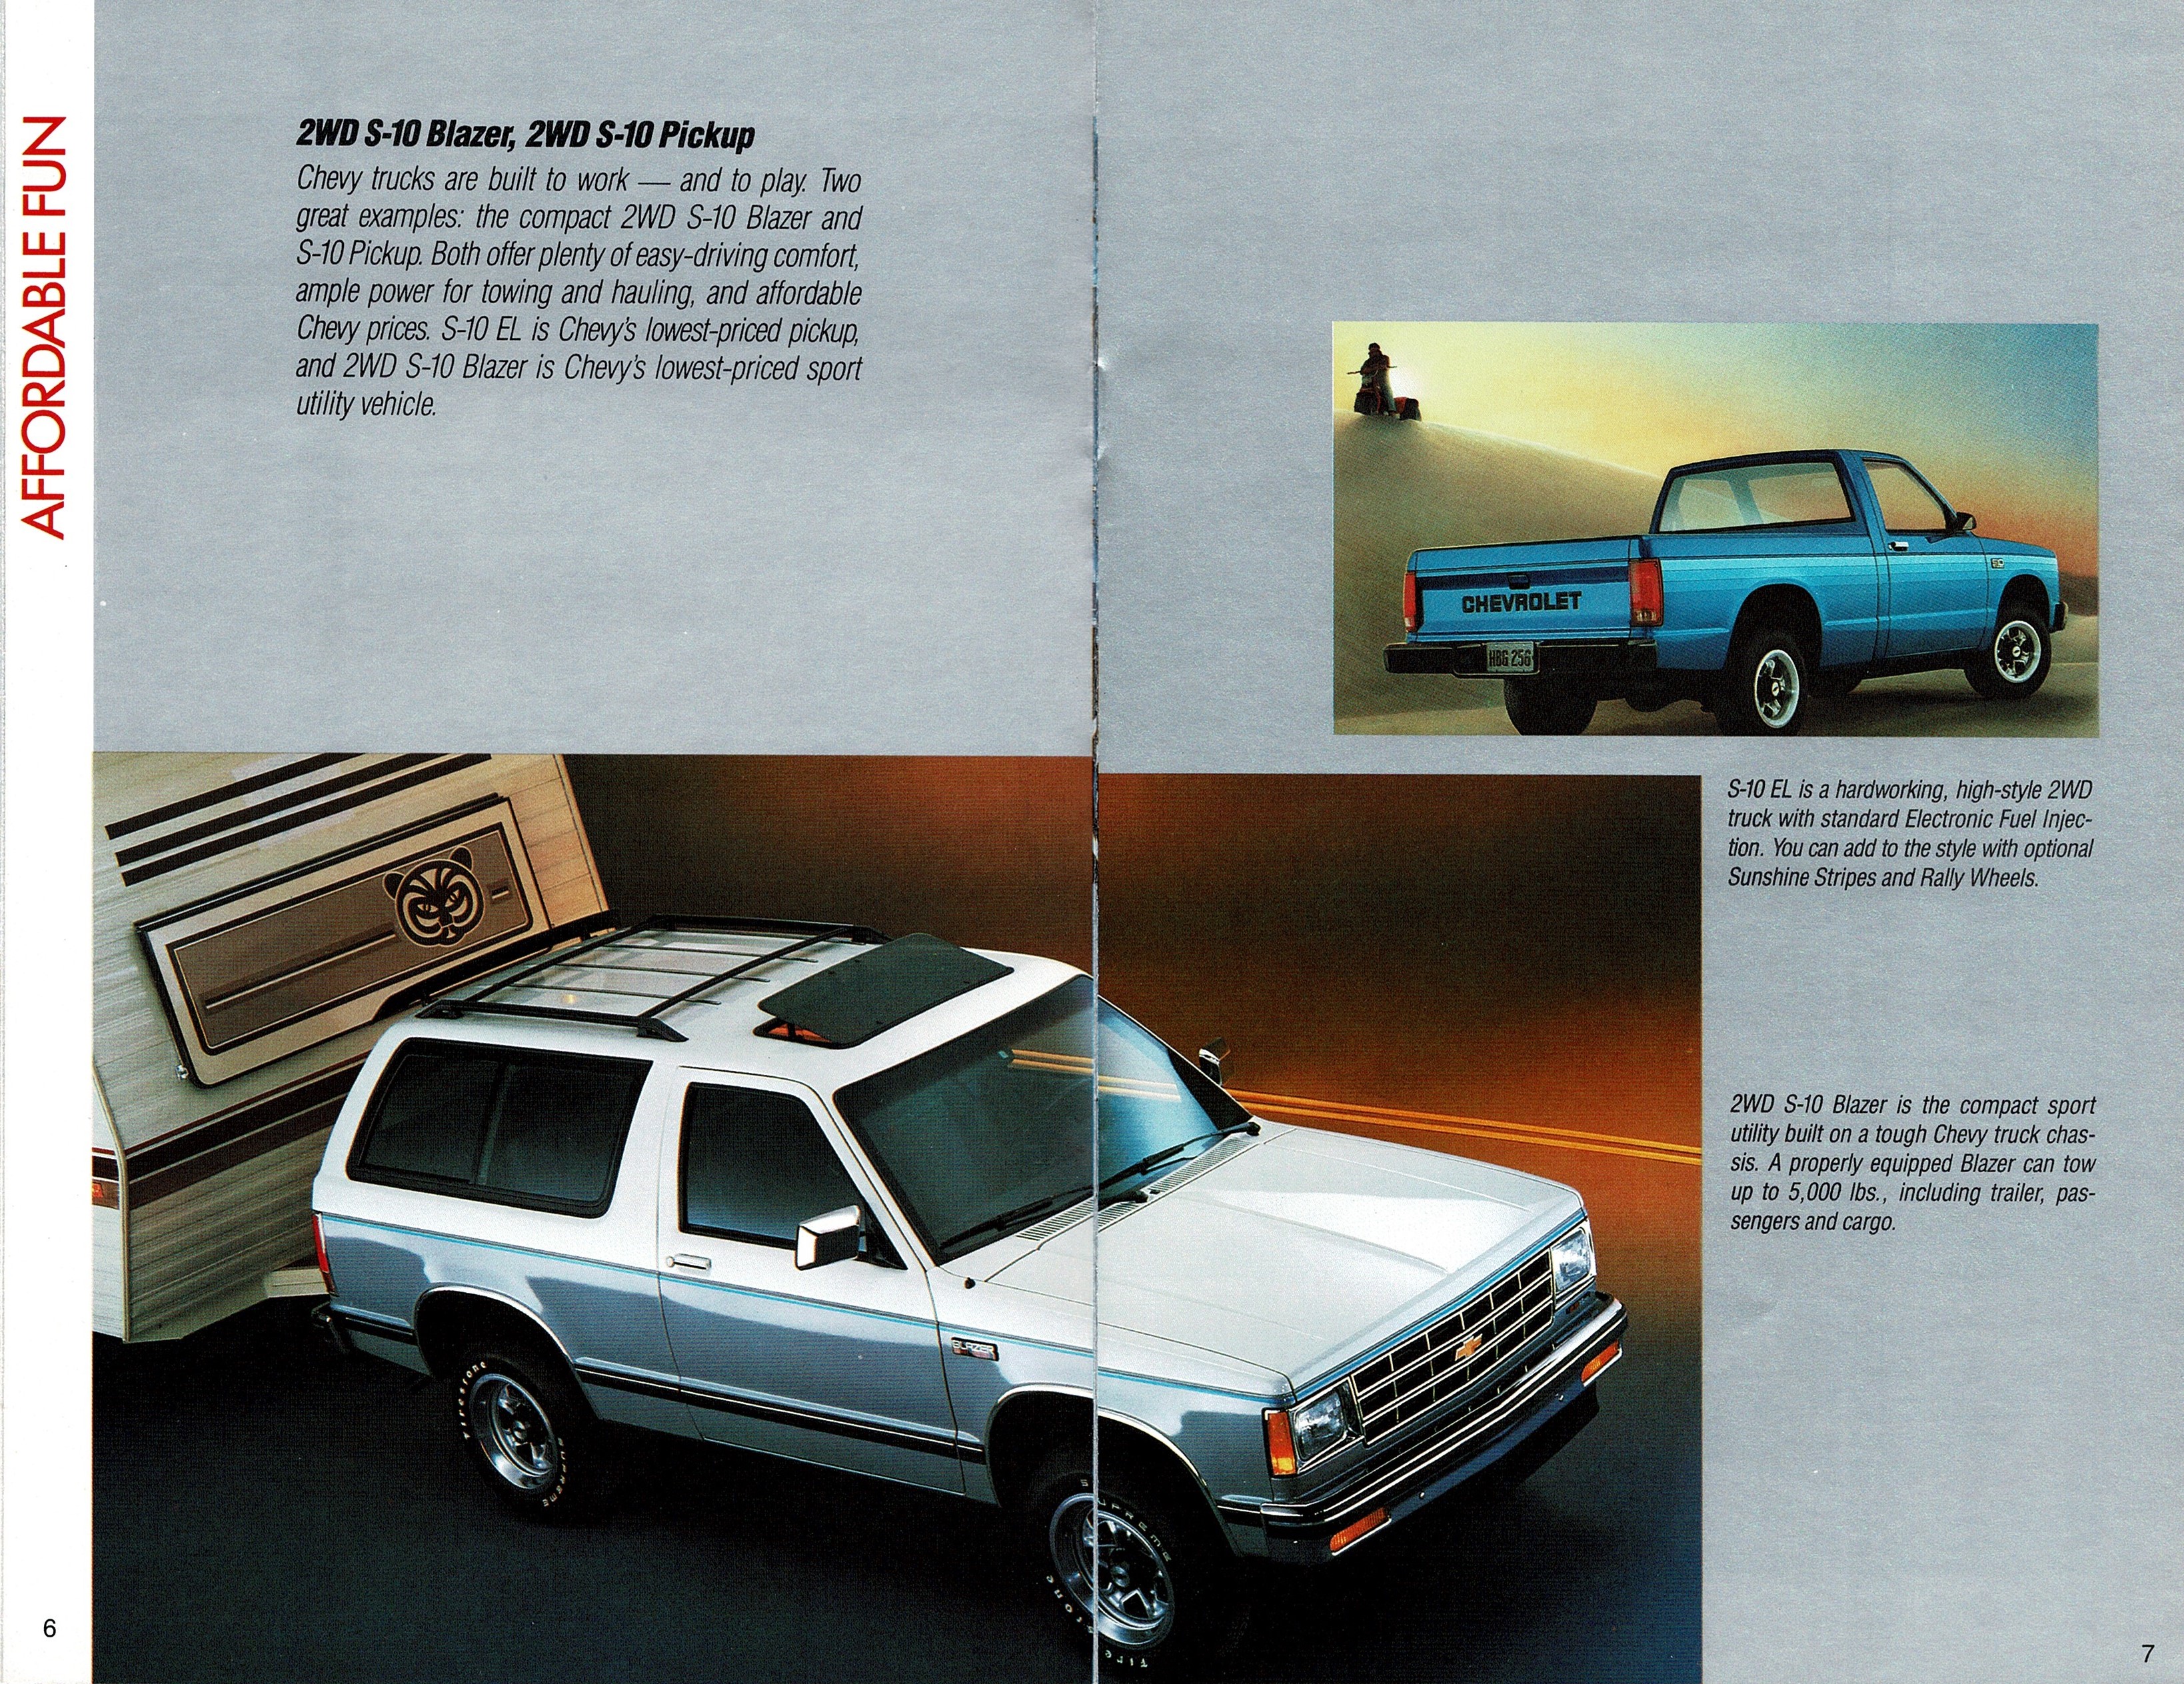 1988 Chevrolet Cars and Trucks_004